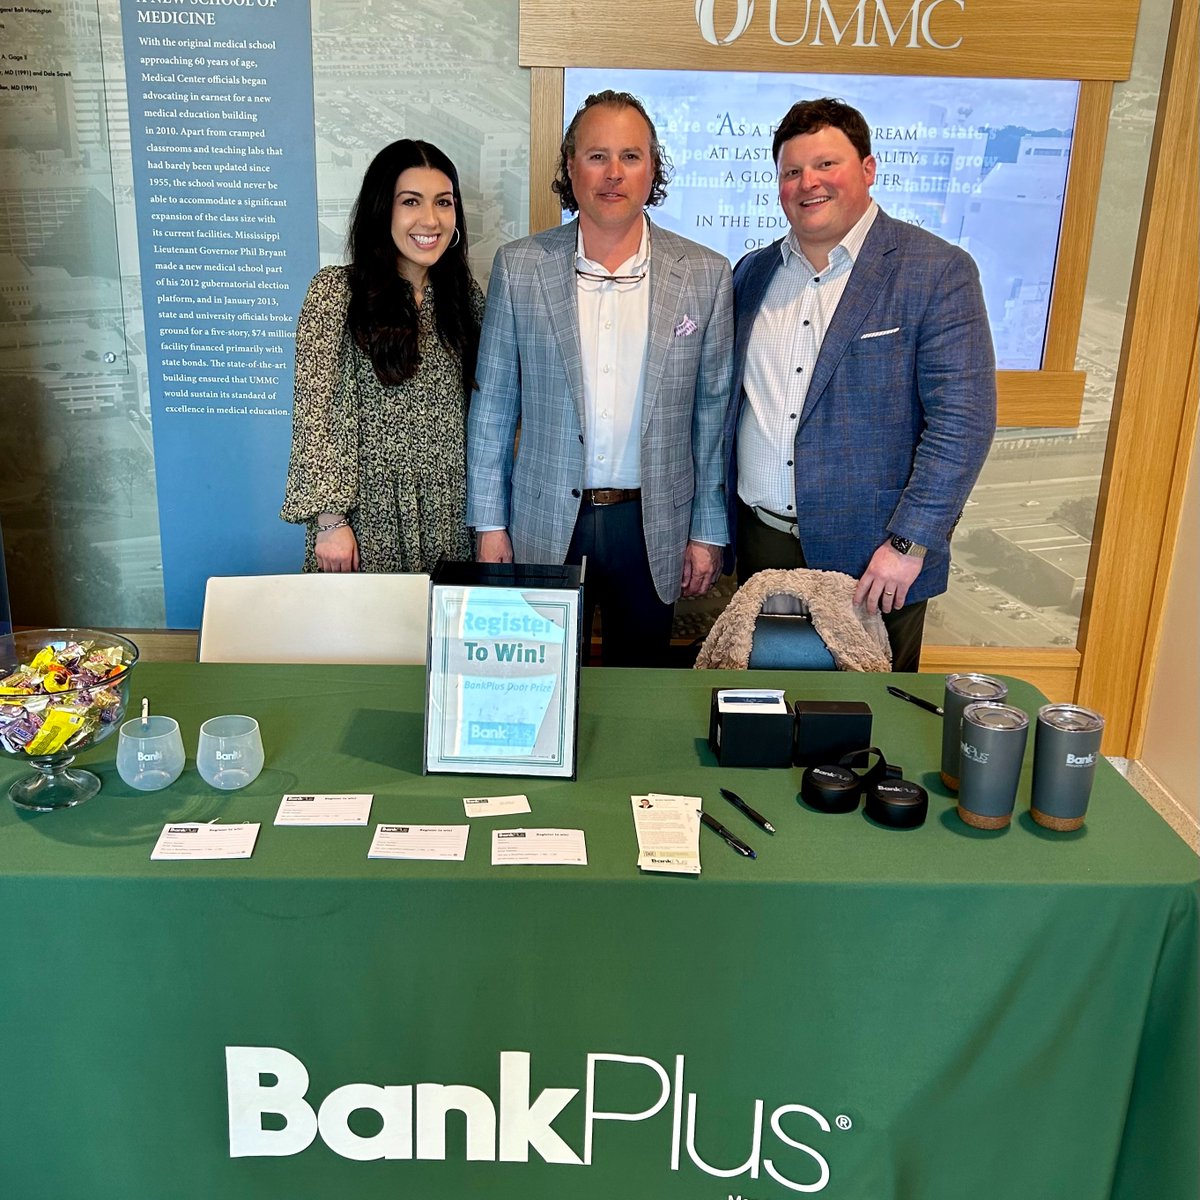 Congrats to the recently matched Residents! Members of the Private Client team attended a UMMC Financial Wellness Day and visited with residents on their next steps. To learn about banking solutions available for medical residents, contact us: bit.ly/43xYB9a Member FDIC